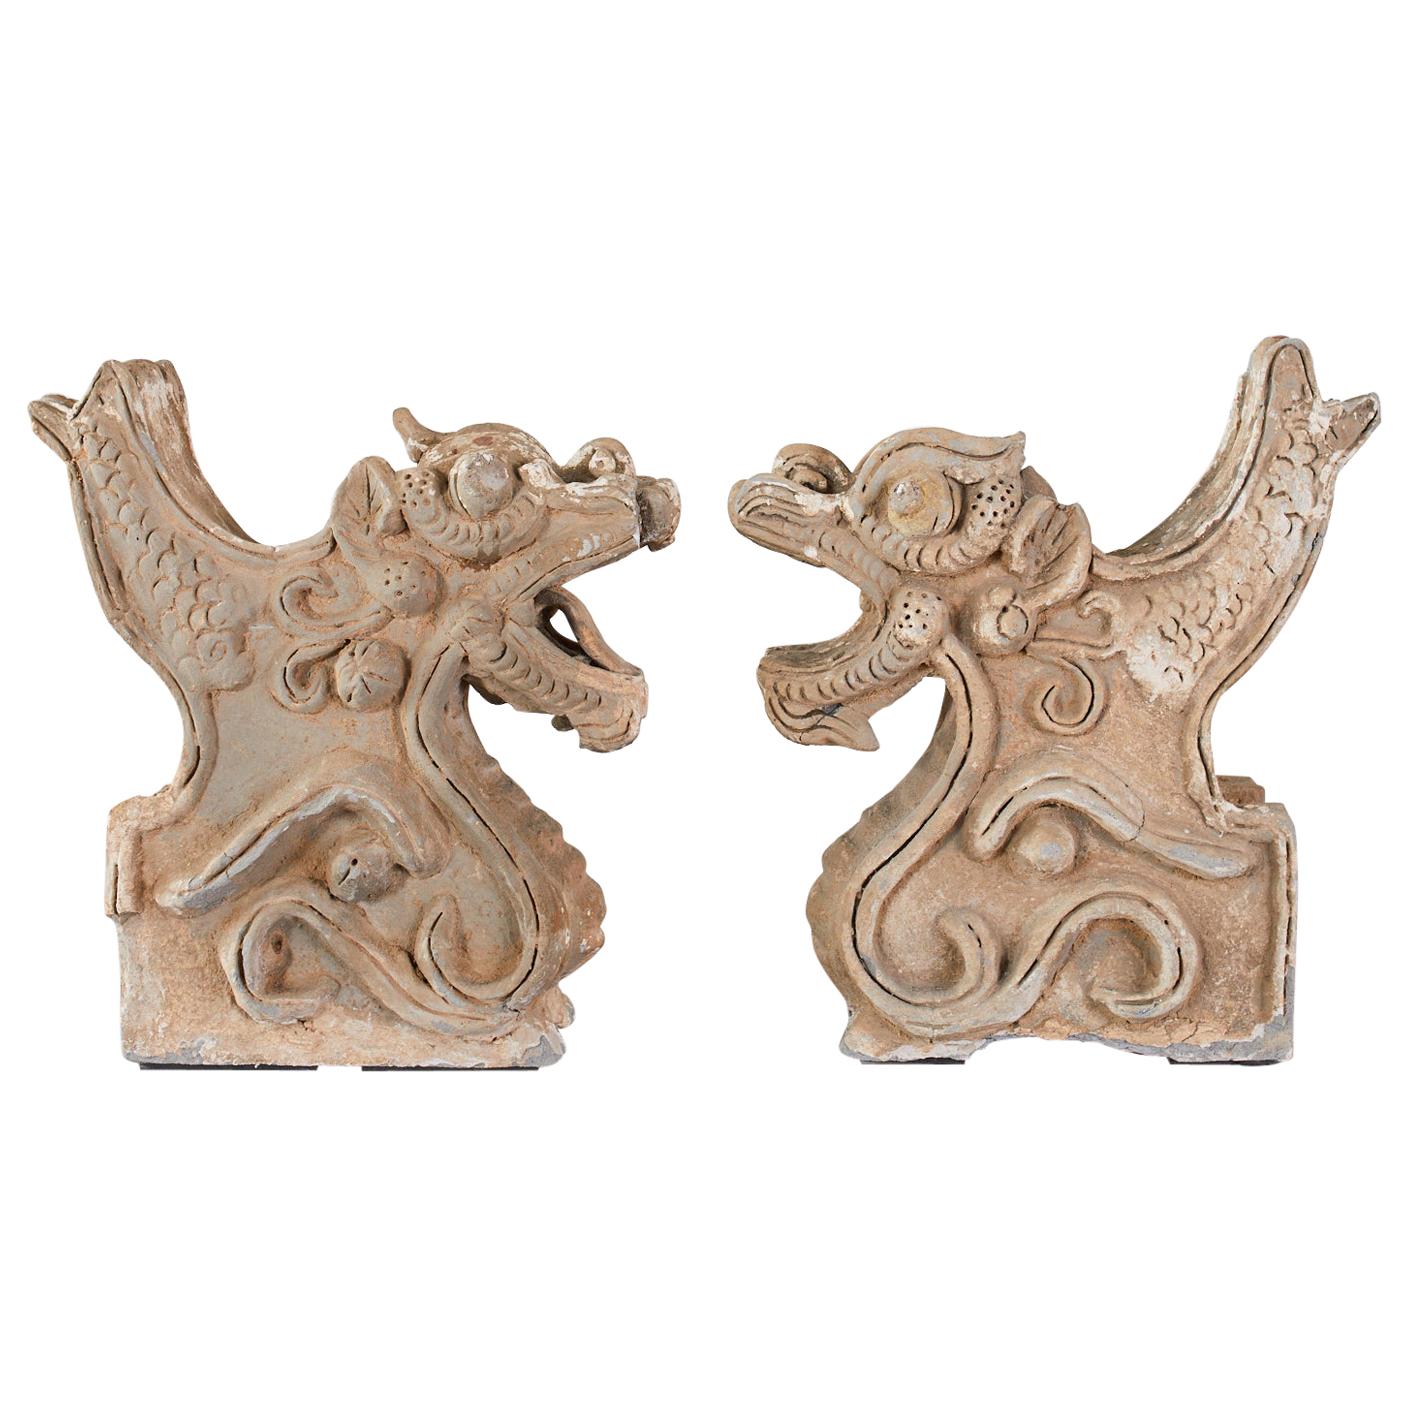 Pair of Chinese Ming Dynasty Style Dragon Roof Tiles